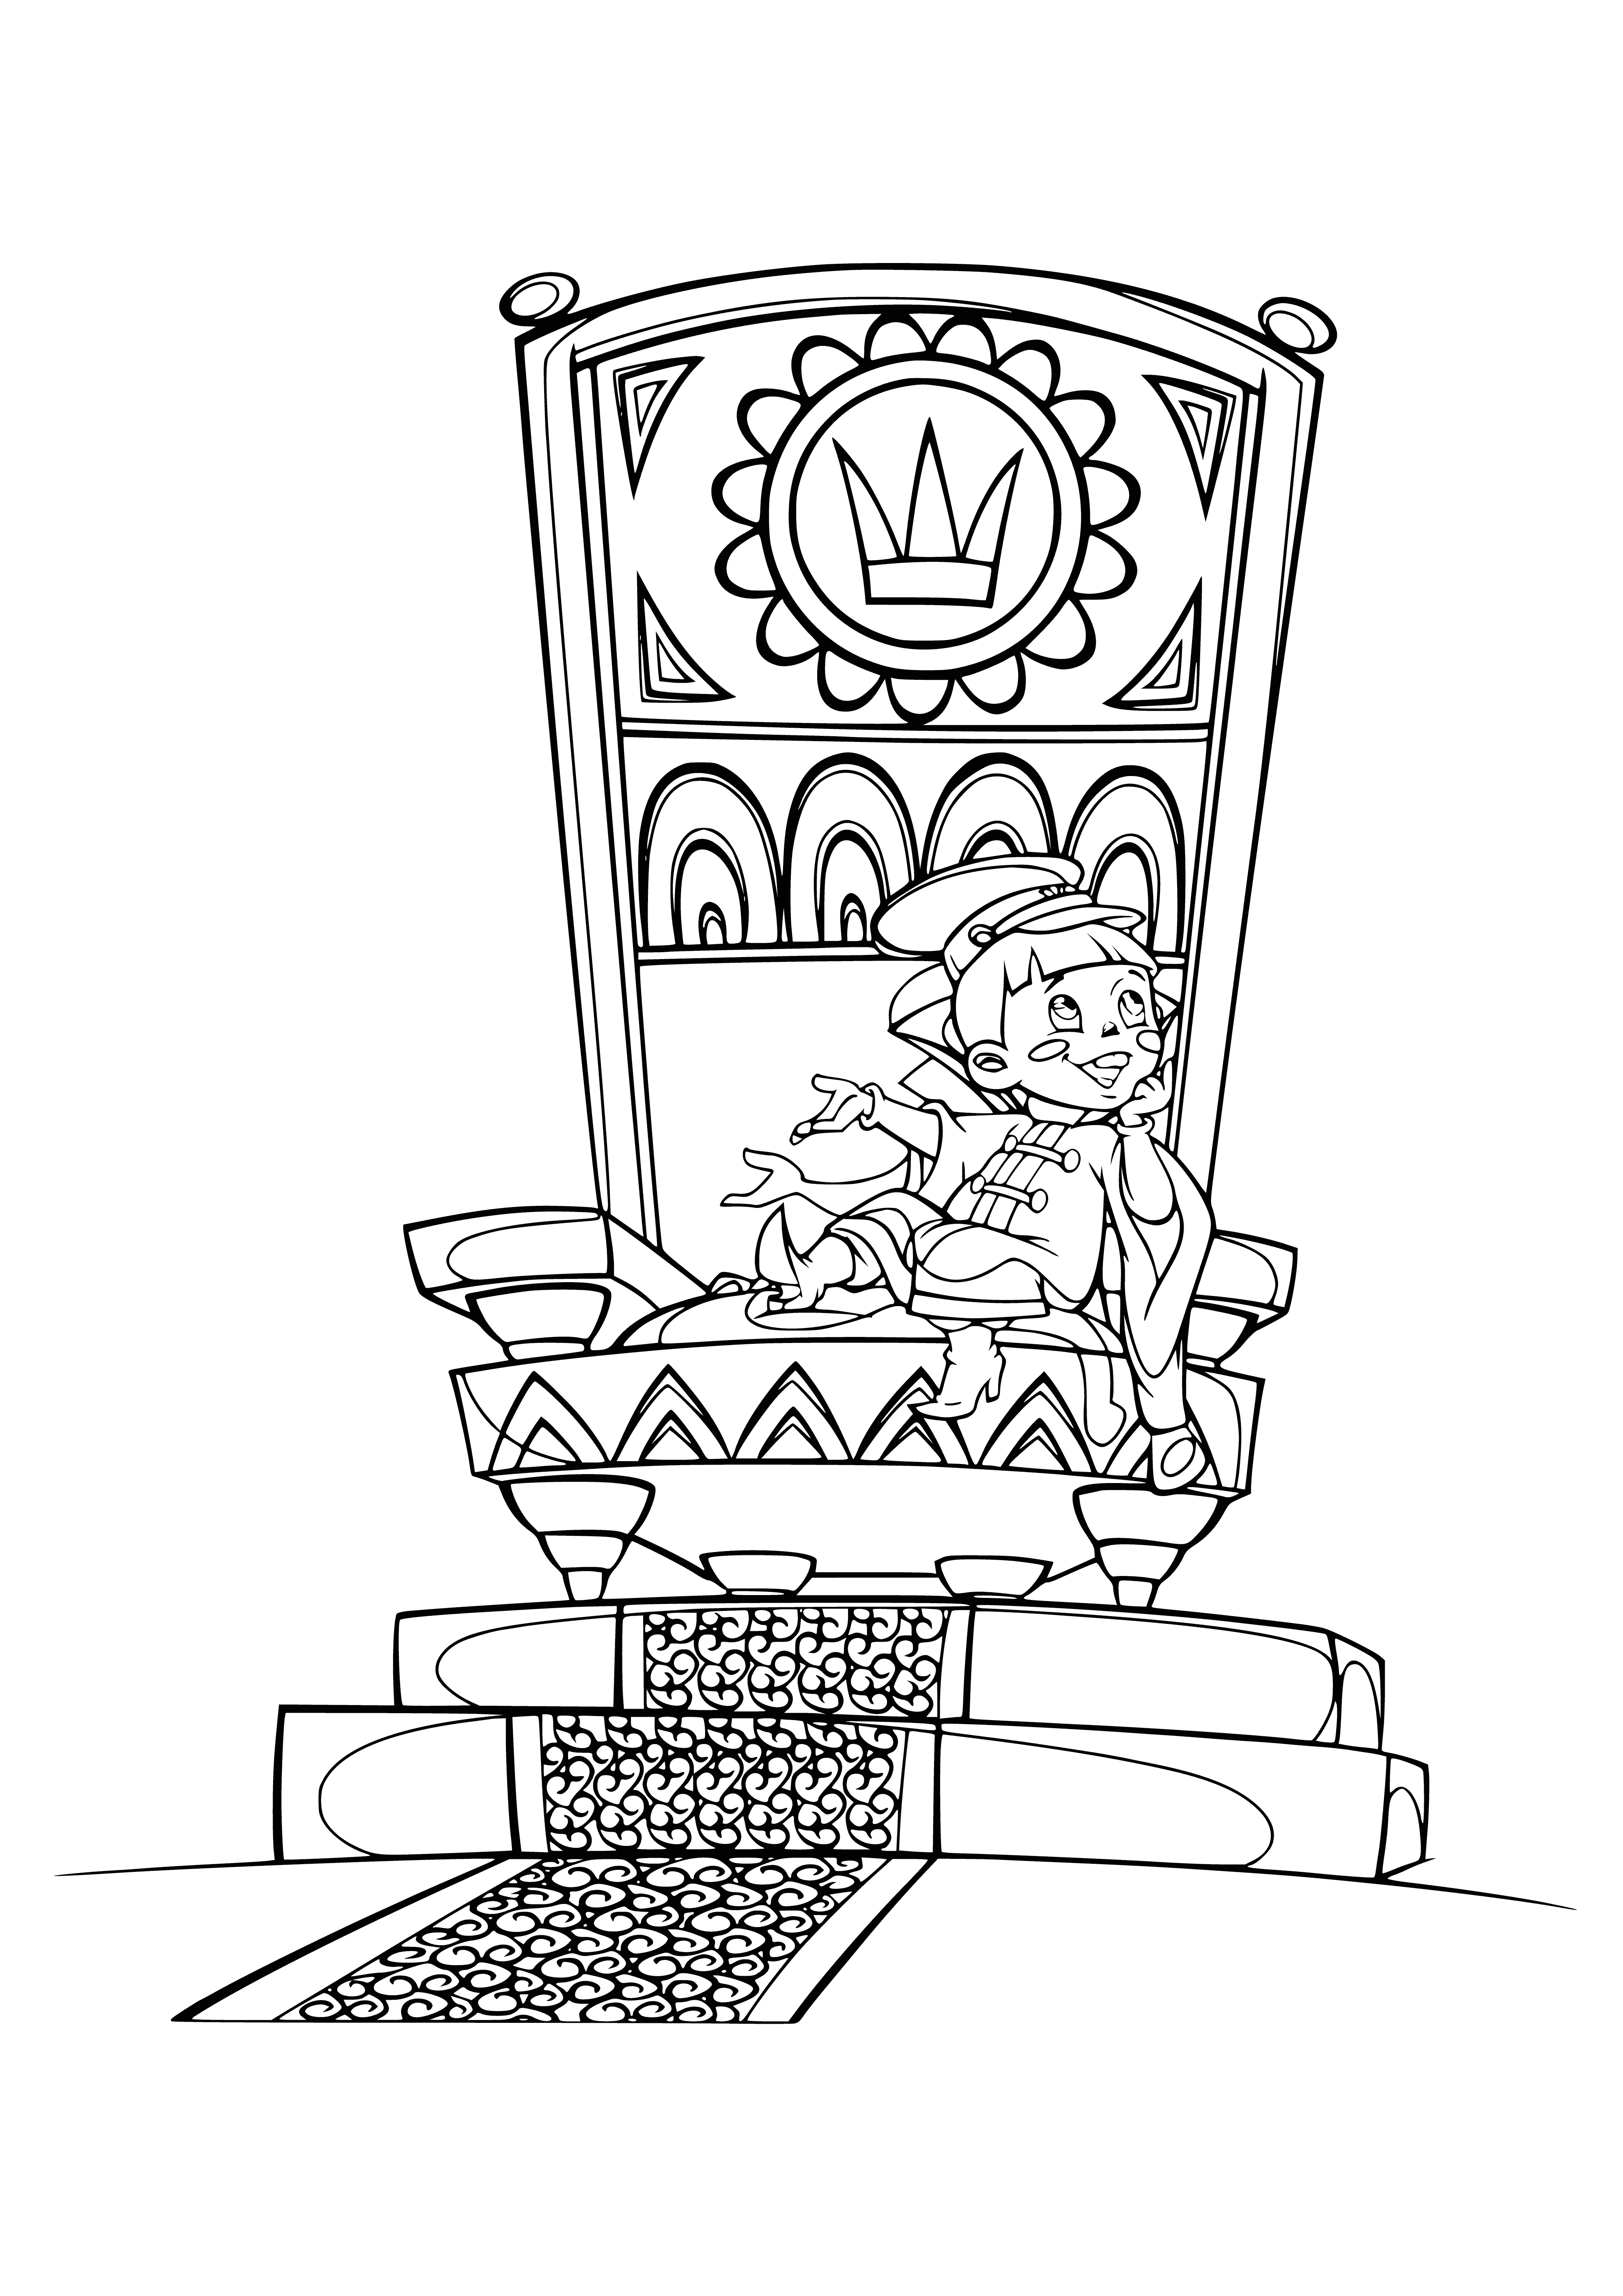 coloring page: In the kingdom, Vovka is king, ready for royal duty holding scepter & orb and wearing cloak & crown.